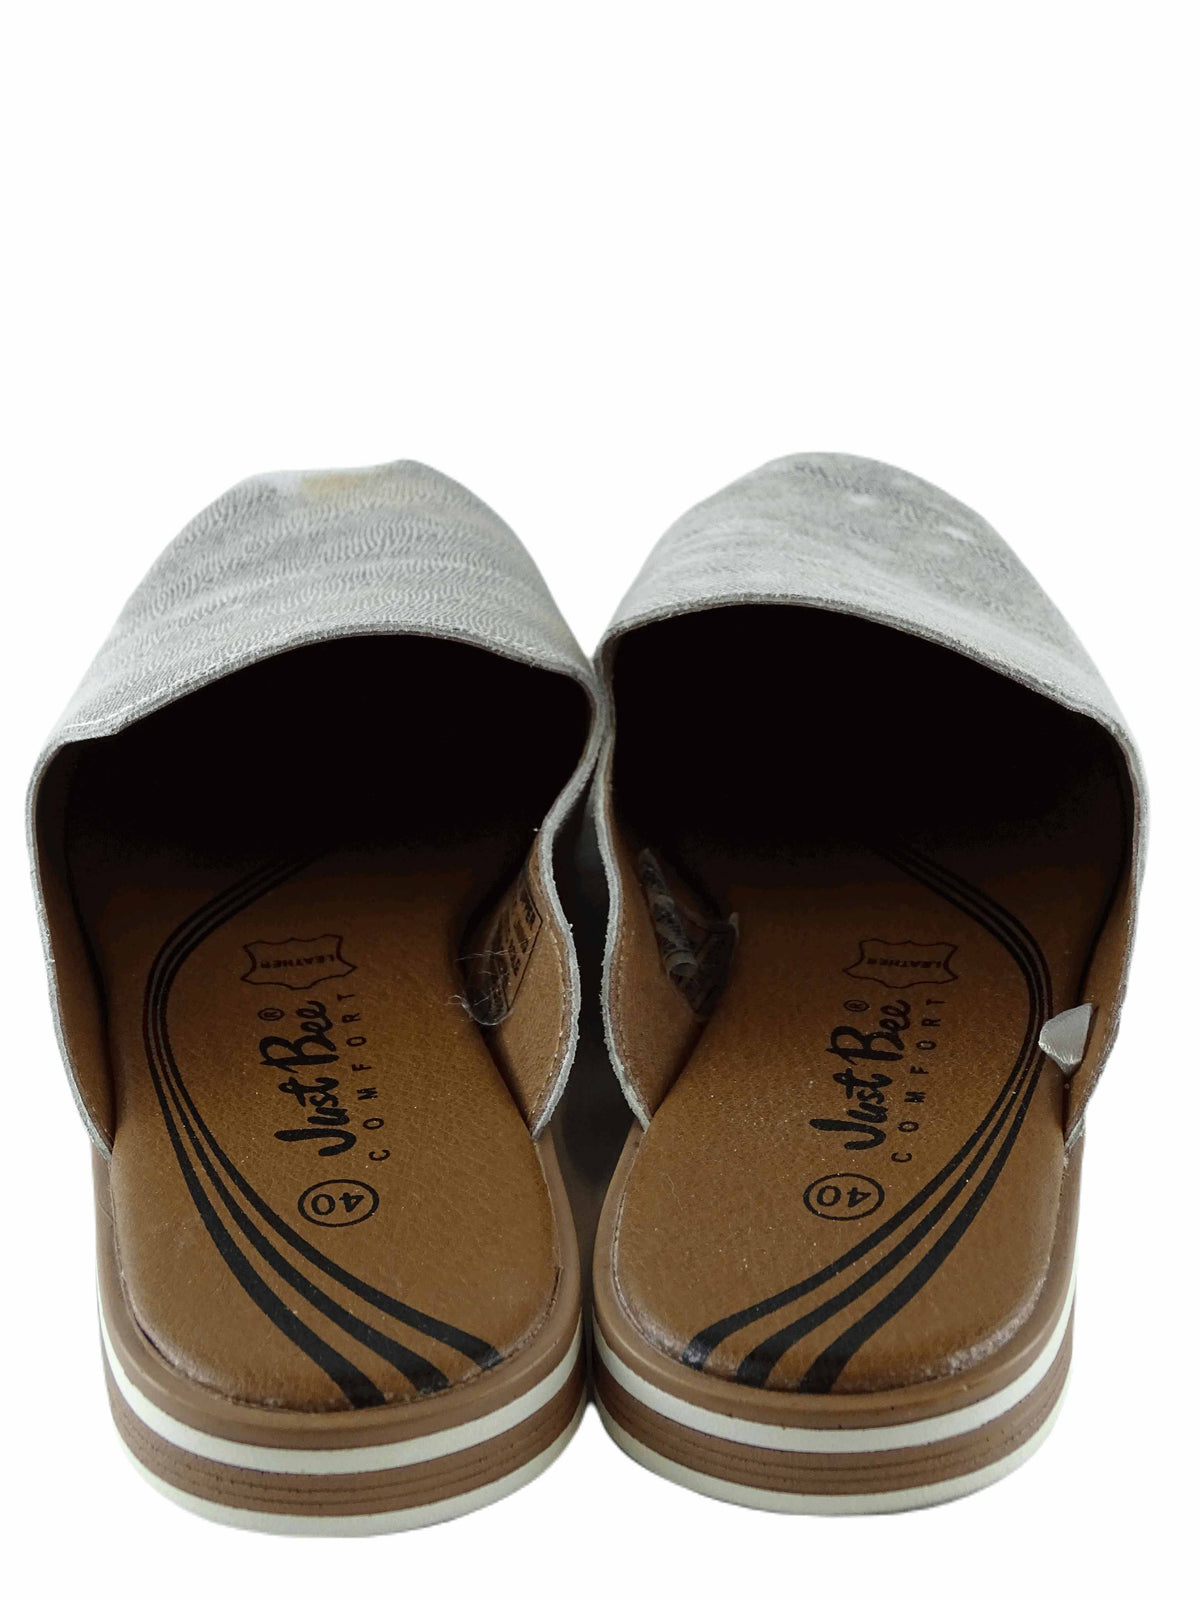 Just Bee Silver Print Loafers AU/US 9 (EU 40)